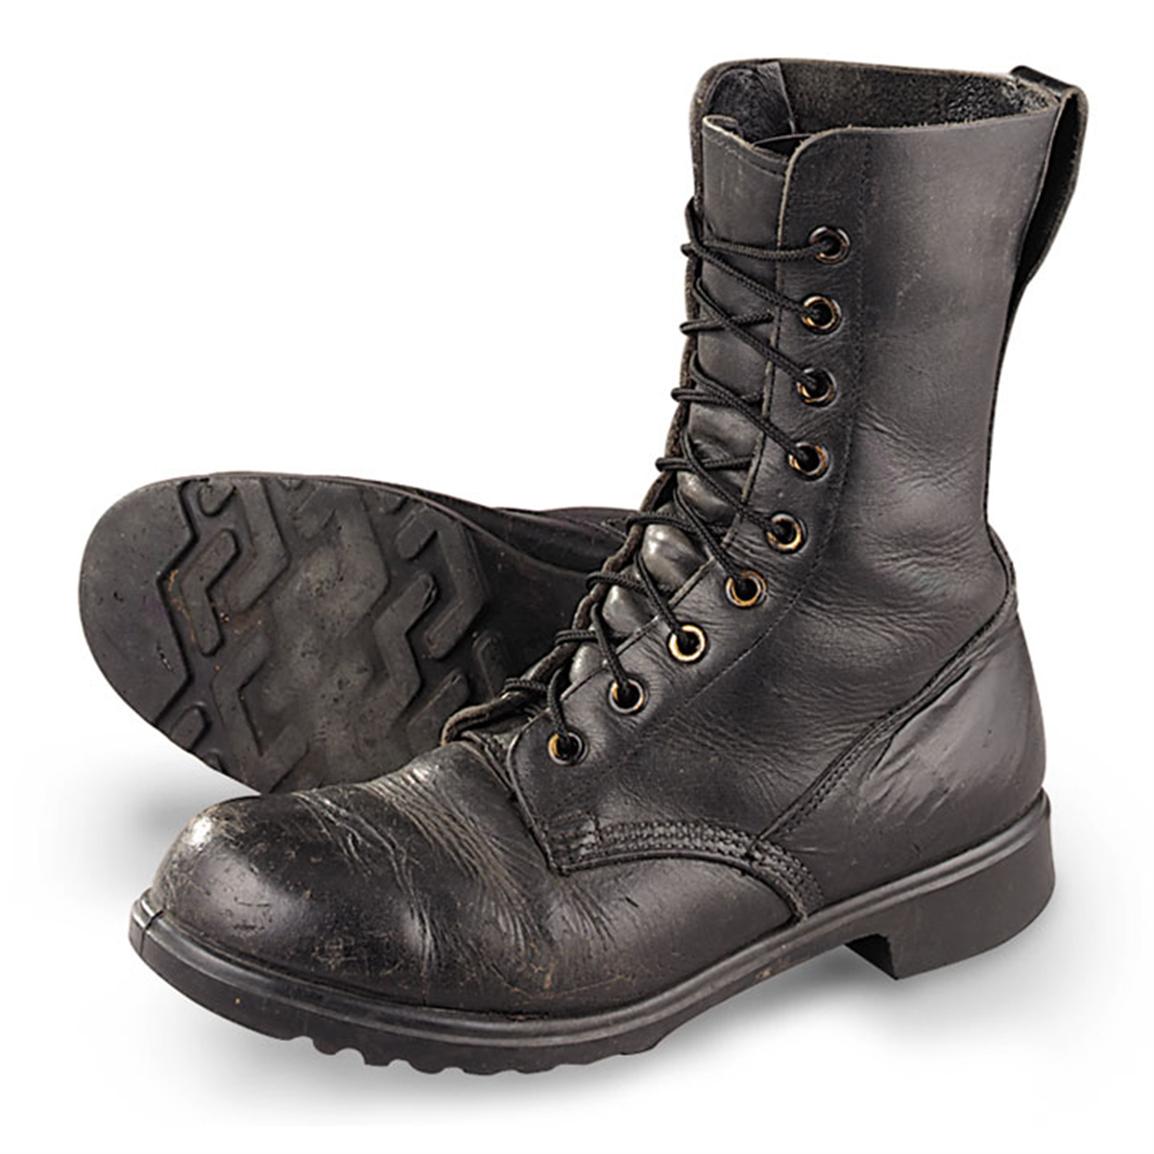 Buy > british army boots black > in stock